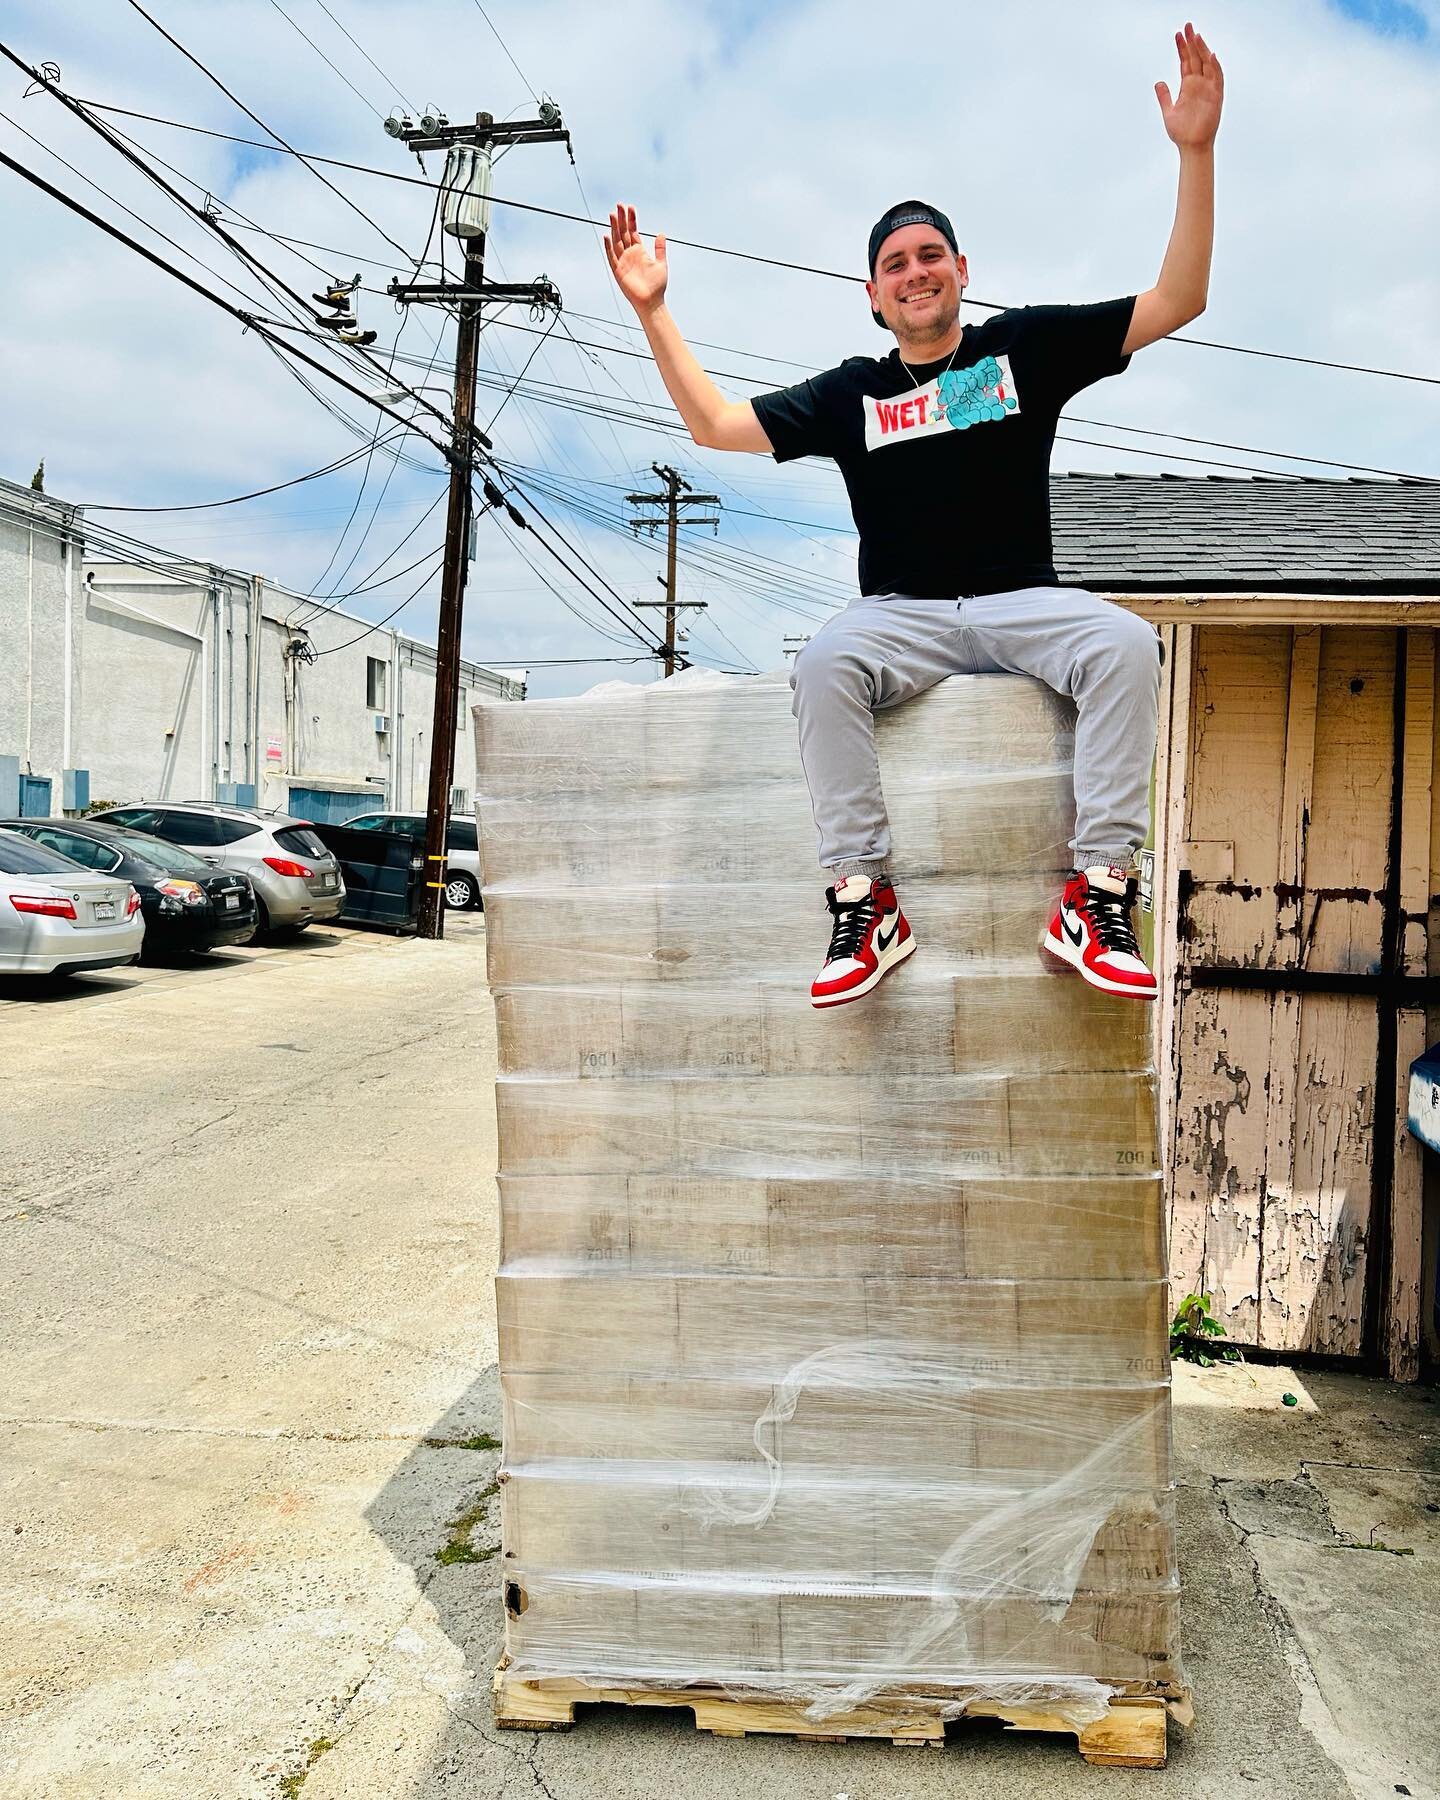 PALLET BOYZ ARE BACK🚨 GIVEAWAY 🚨 

The grind is relentless and we&rsquo;re super appreciative of all your love and support! 🫶
A fresh pallet of glass has us excited for some big moves, so let&rsquo;s do a giveaway/thank you! 😁

Giveaway rules:
&b